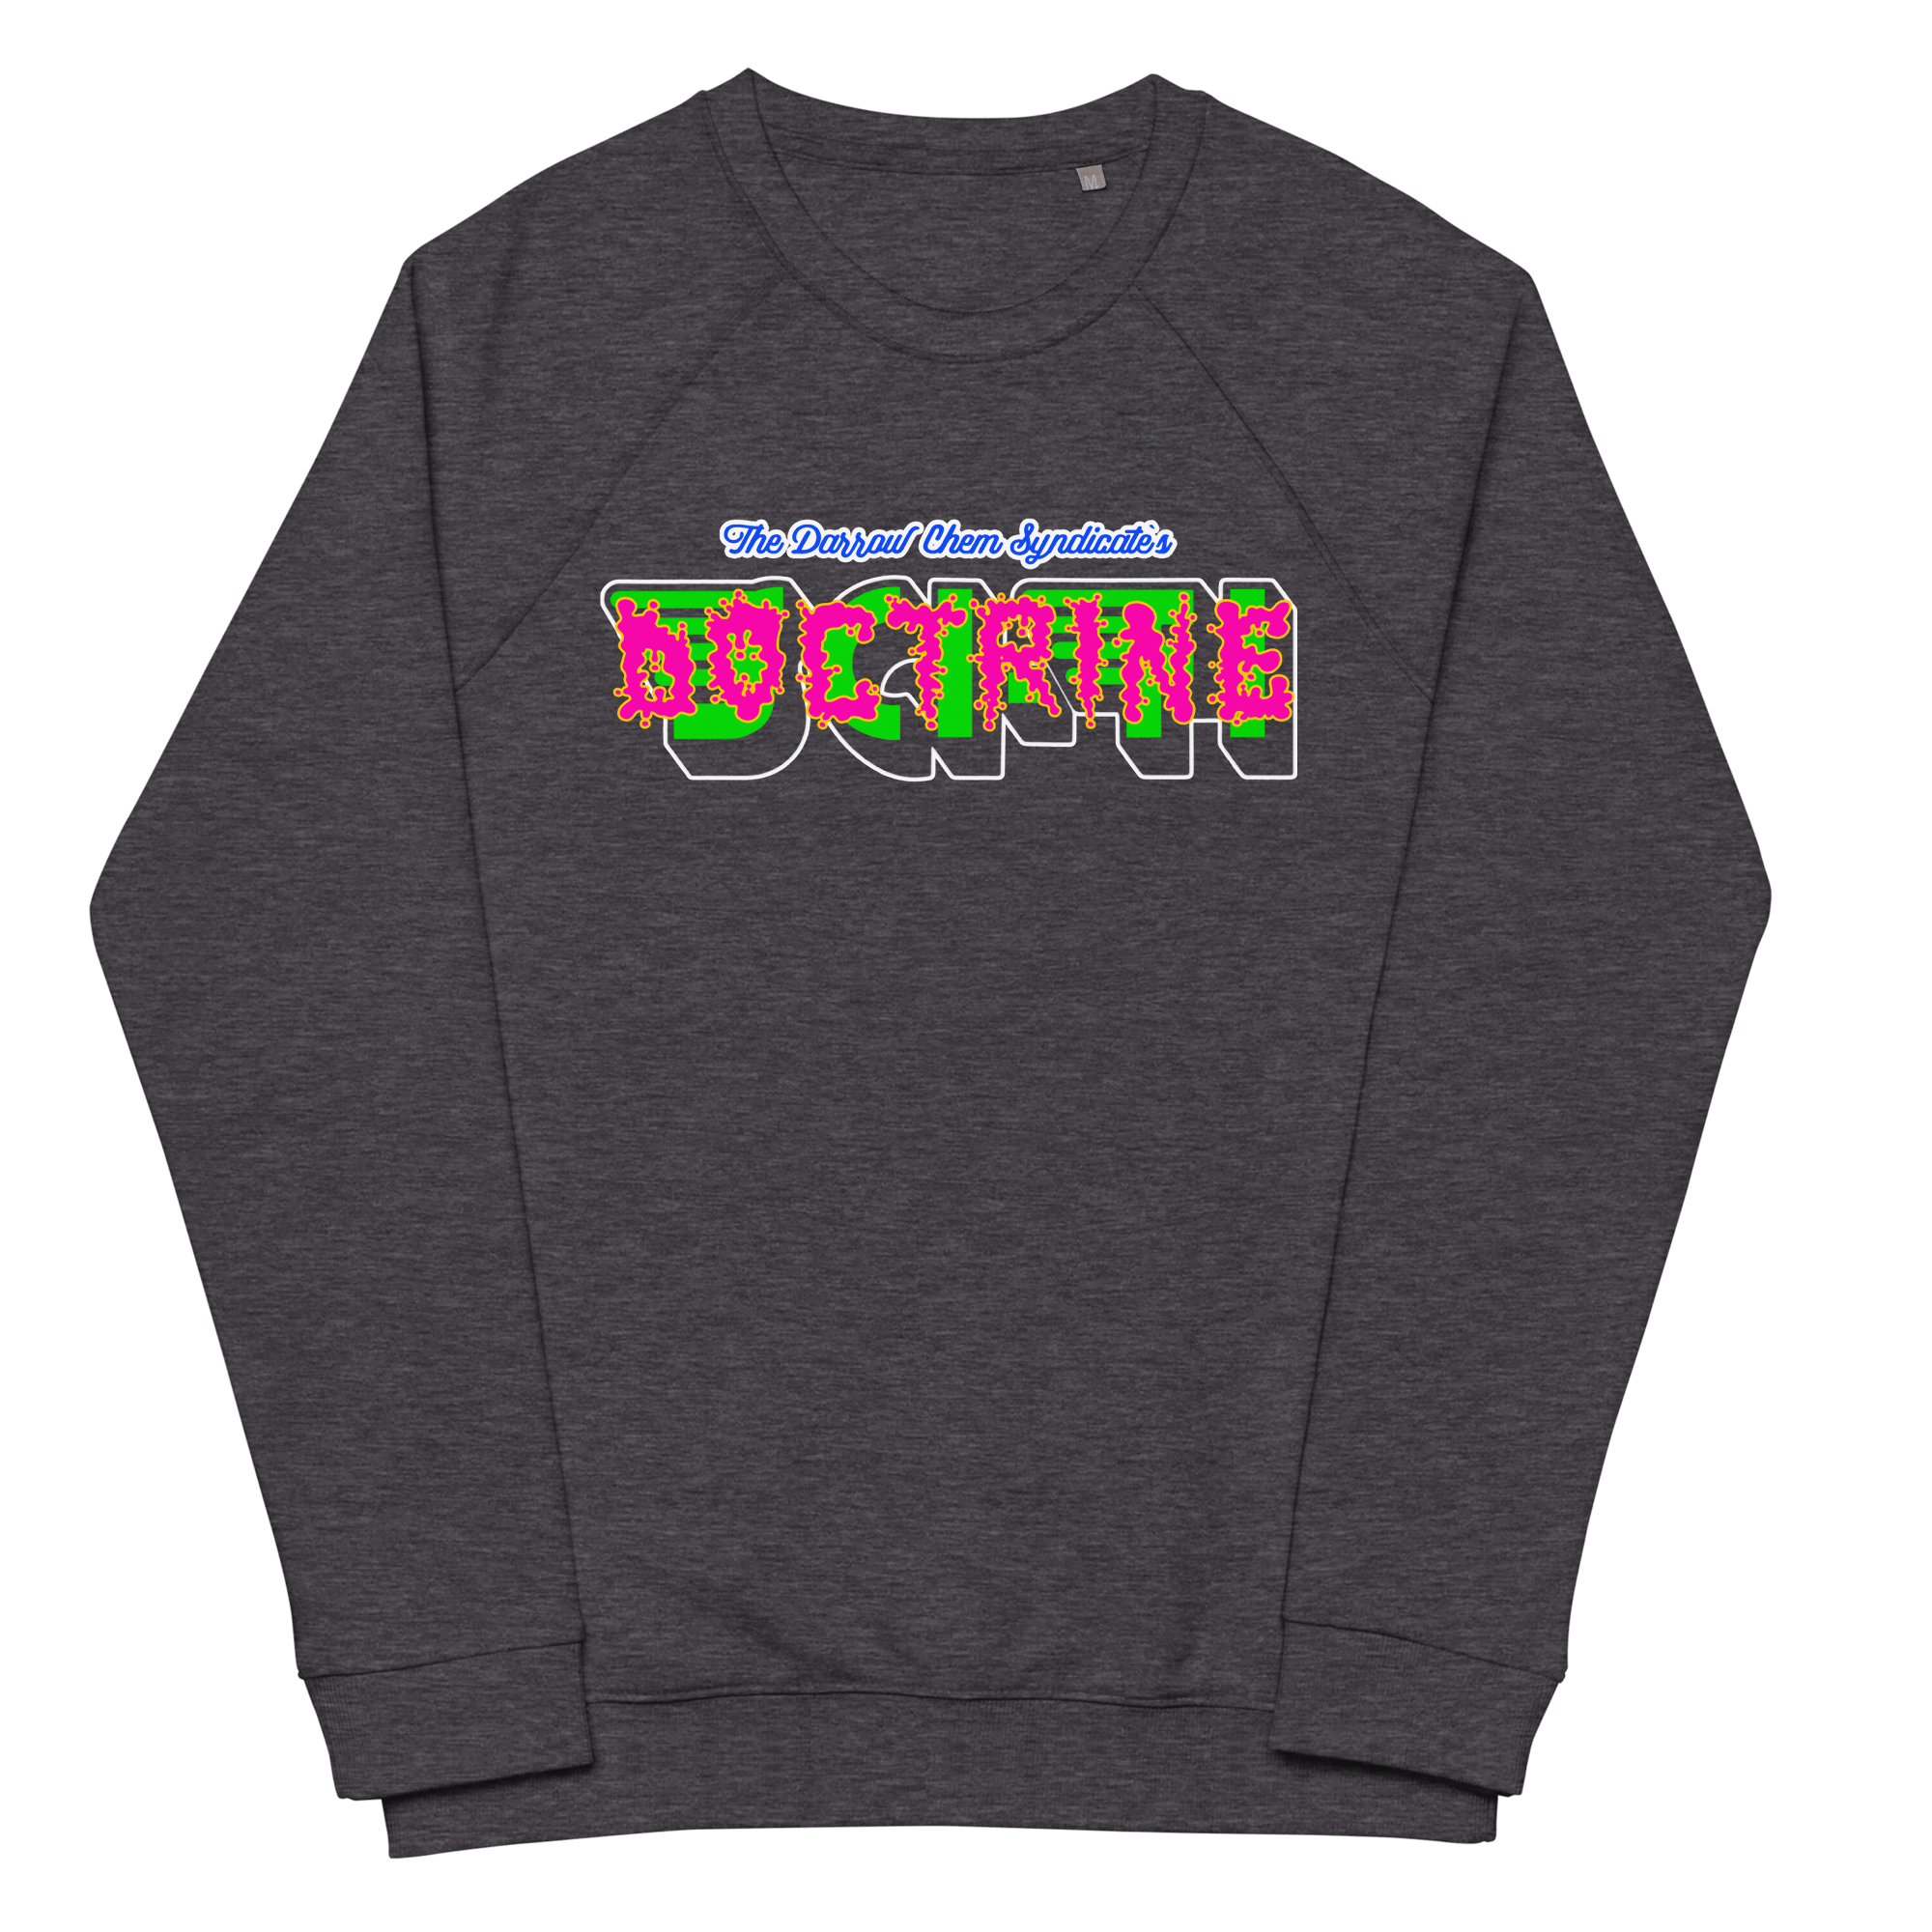 Sci-Fi Doctrine Raglan SweatshirtImmerse yourself in comfort and style with the Sci-Fi Doctrine Raglan Sweatshirt. Achieve both tasks effortlessly with this unisex organic gem. Its brushed fleece lining feels like a cloud of softness, while the 100% cotto